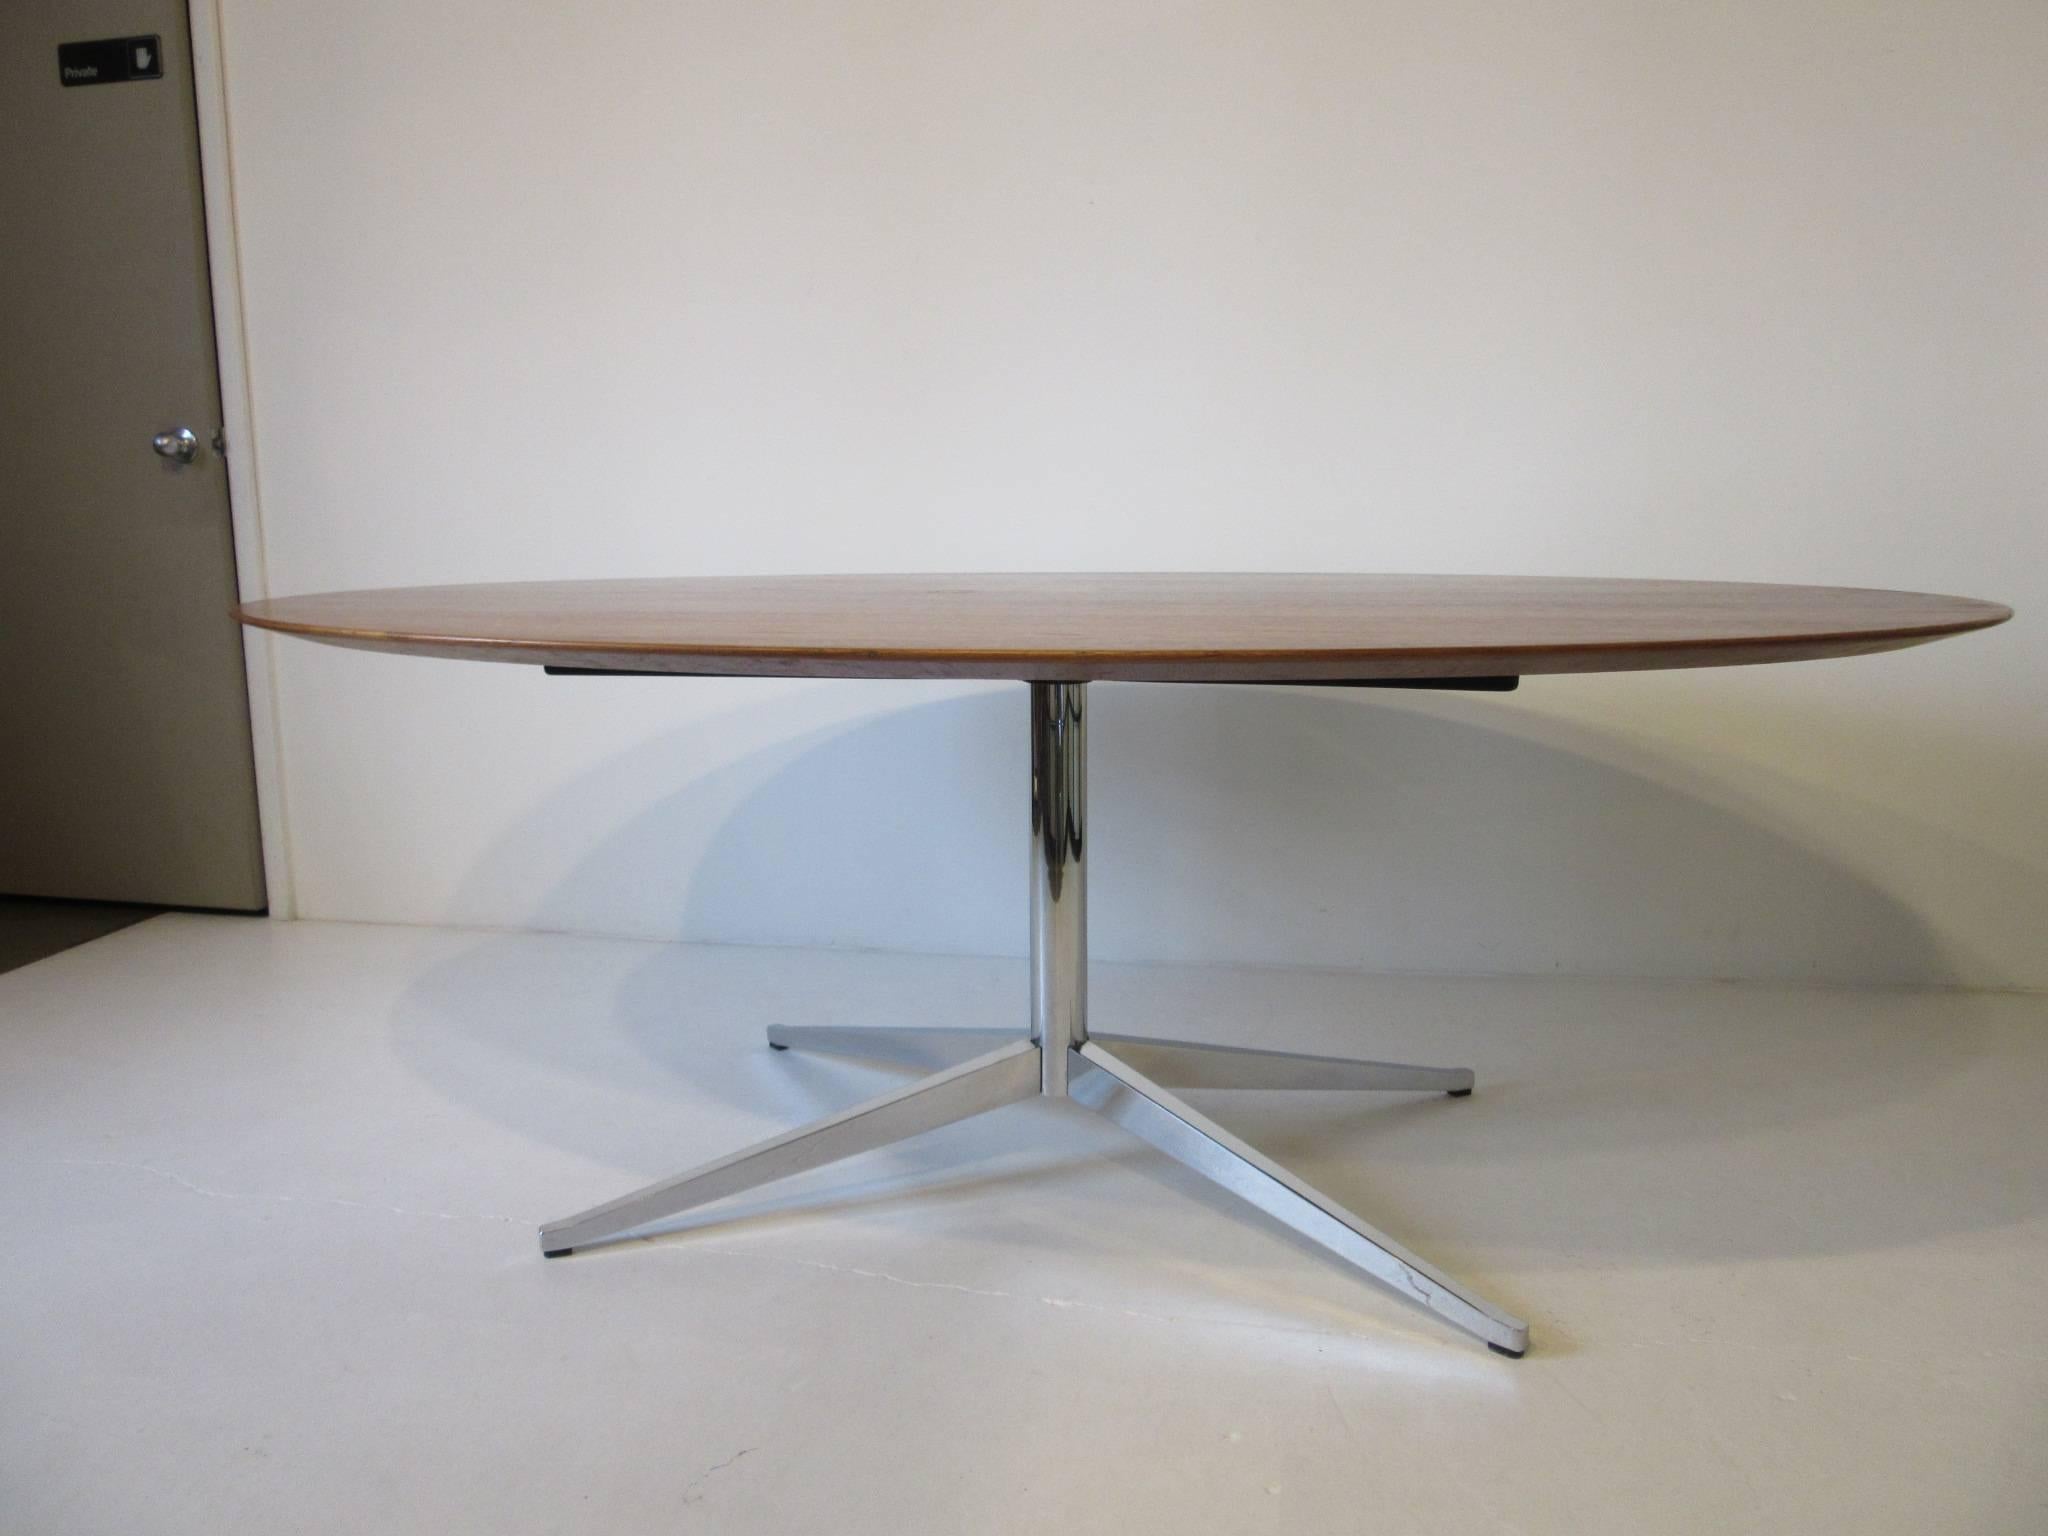 A well grained medium colored oval walnut dining or conference table in a satin finish with a heavy gauge welded steel X-base in polished chrome. Manufactured by Knoll International and designed by Florence Knoll.